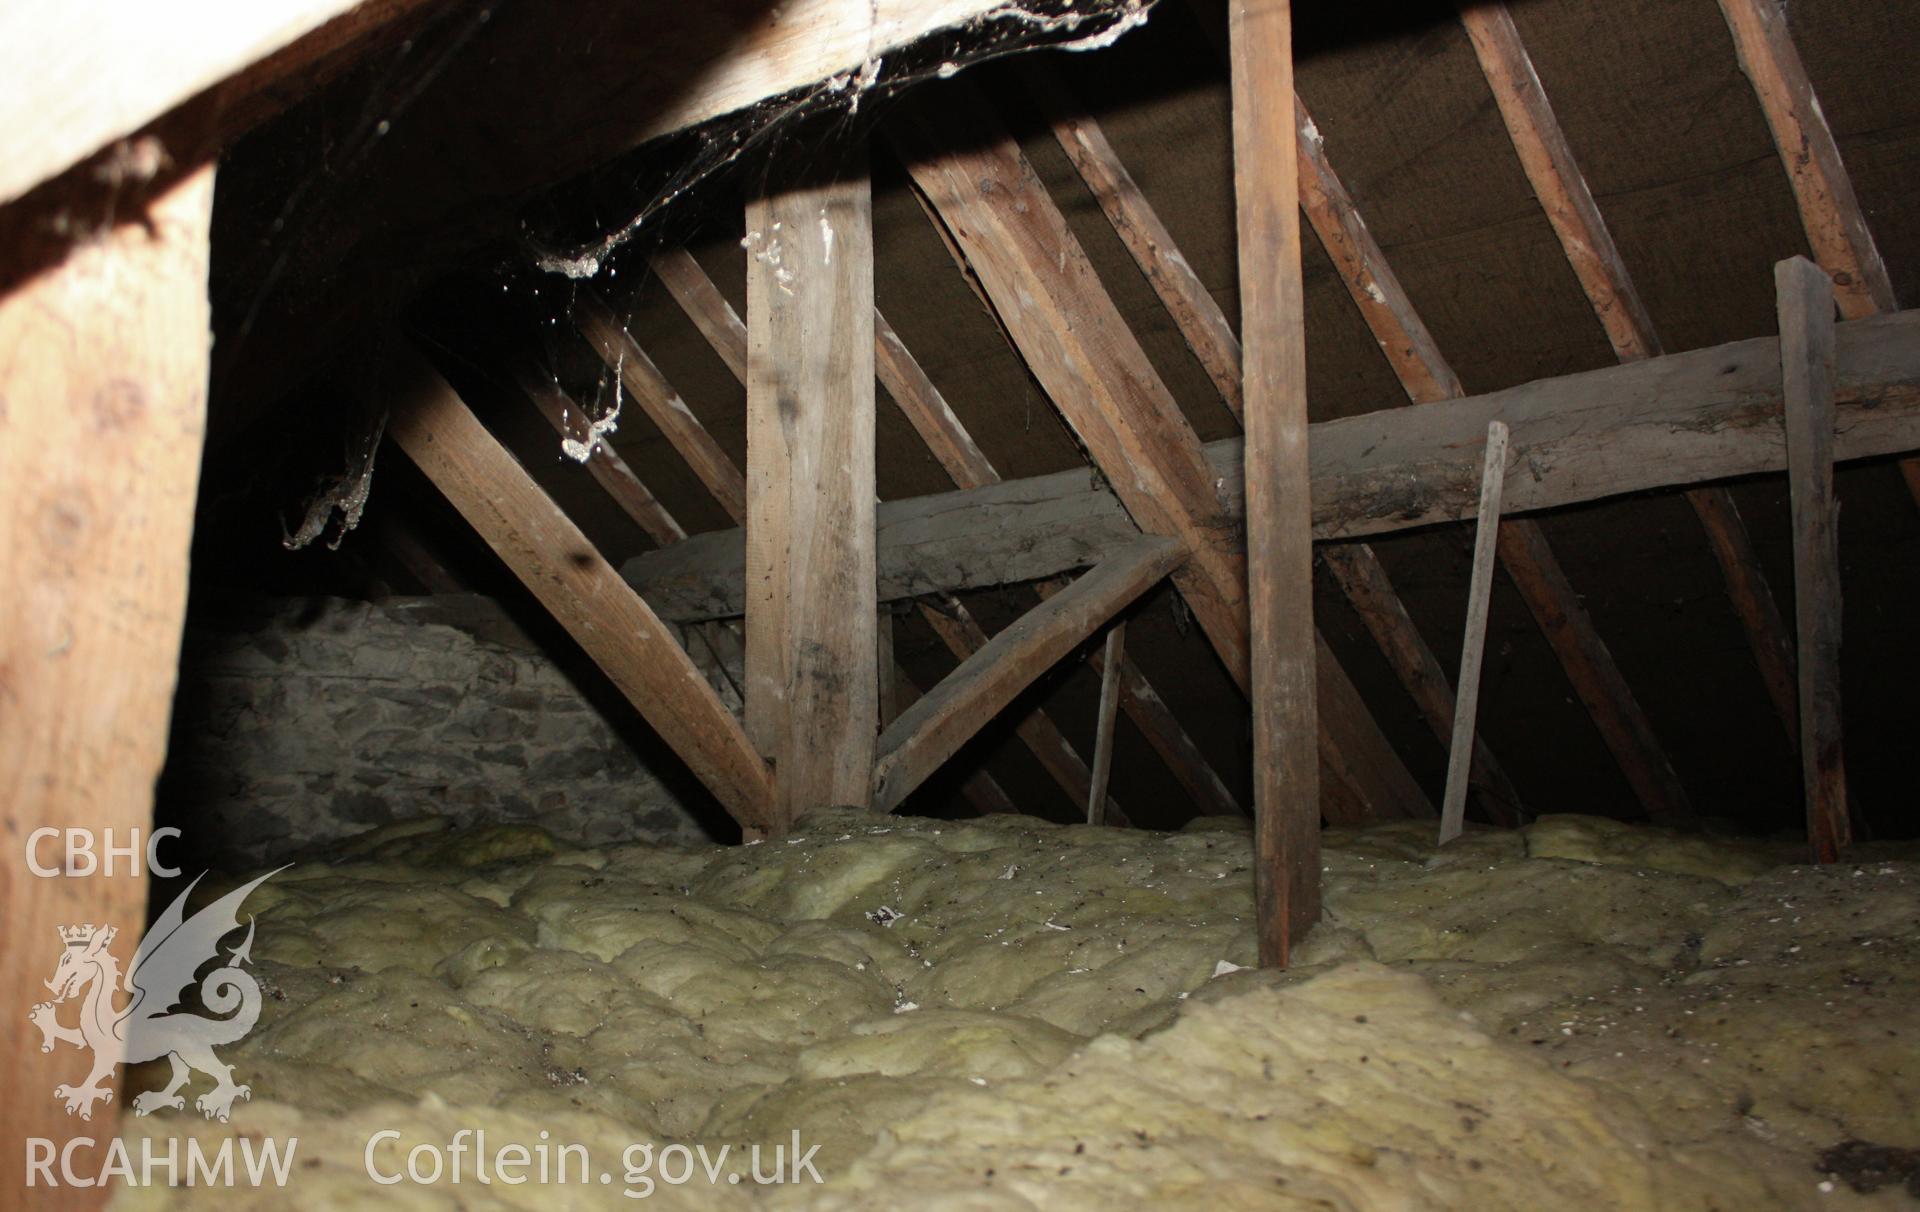 Interior view of timber frame and roof beams at Glanhafon-Fawr Farmhouse. Photographic survey of Glanhafon-Fawr Farmhouse conducted by Geoff Ward on 4th November 2010.